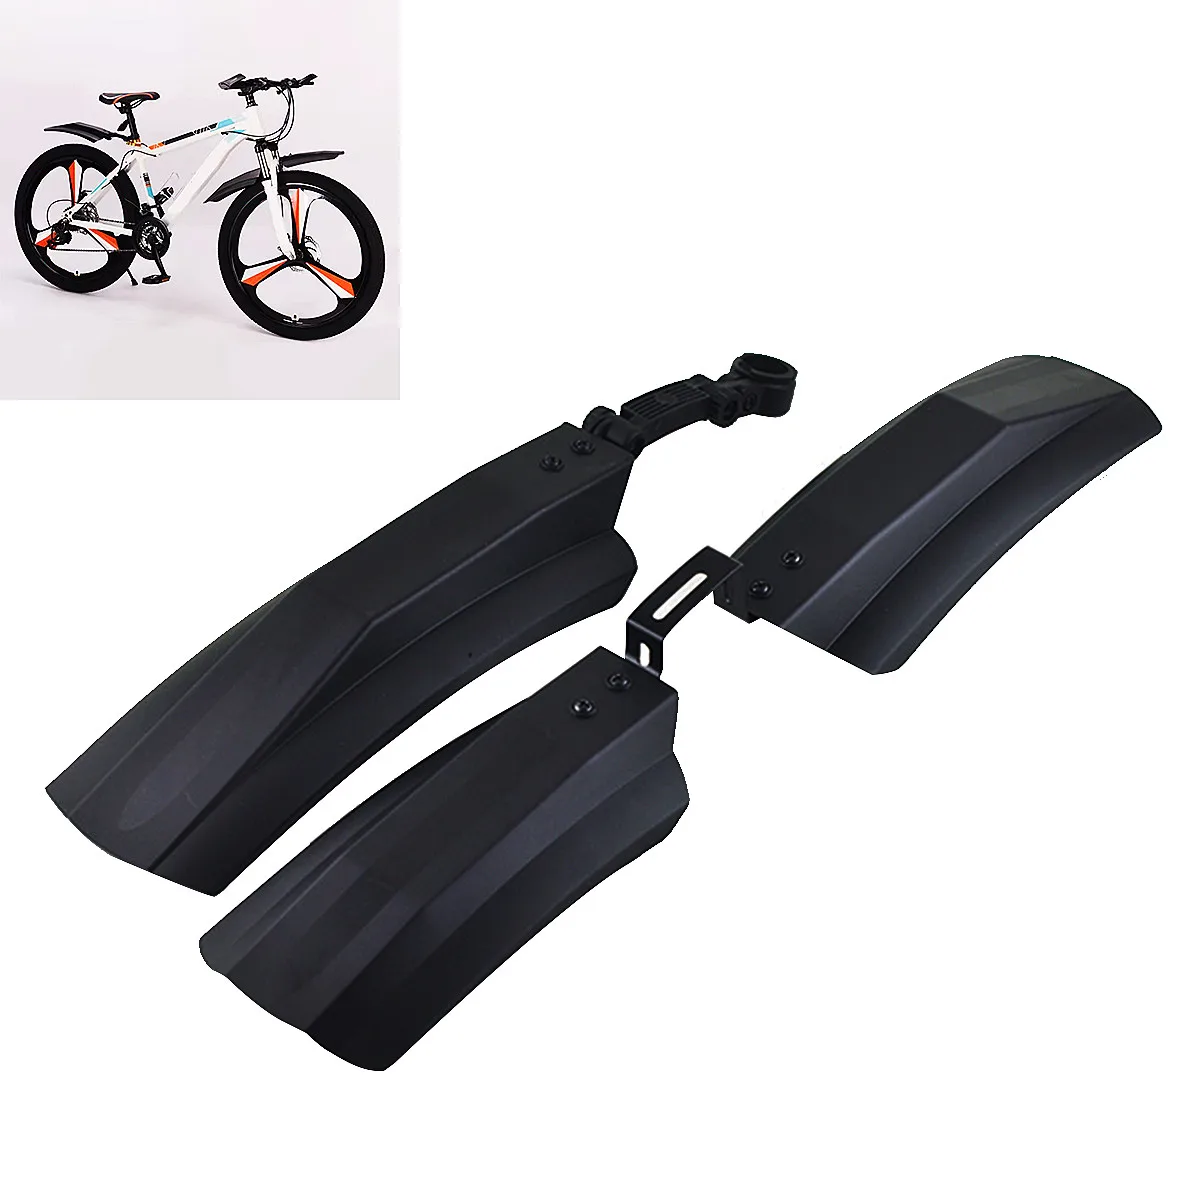 2 Pcs 26 Inch Bicycle Fenders Bike Folding Front Rear Mudguardfor Fat Tire Mountain Bike Mud Guard Wings For Bicycle Accessories